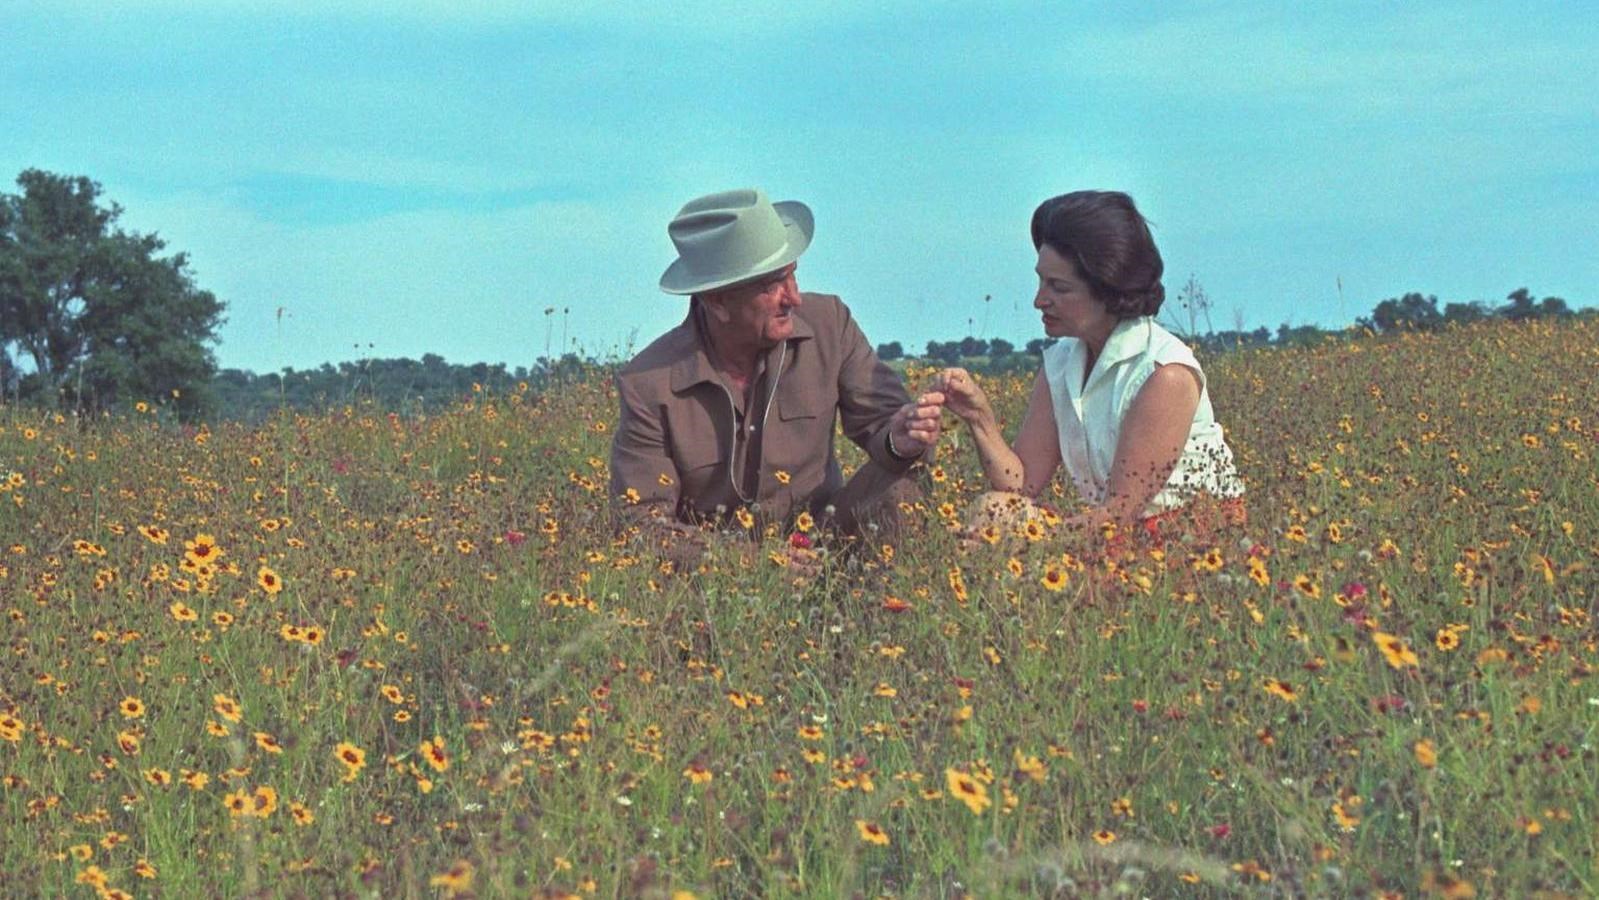 President and Mrs. Johnson touch hands while sitting in a large field of yellow wildflowers.